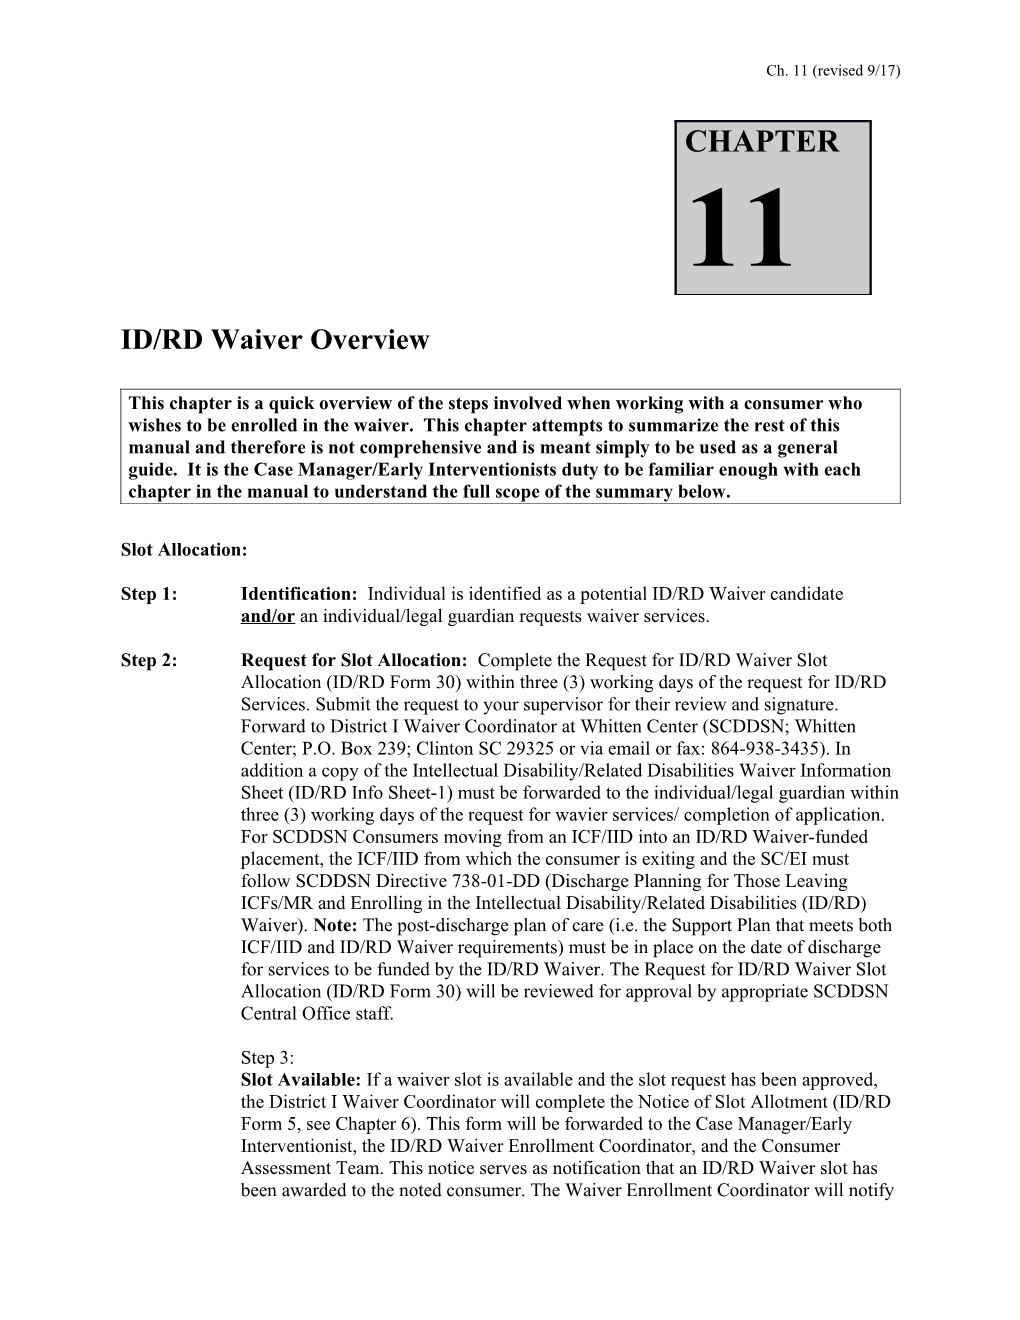 ID/RD Waiver Overview